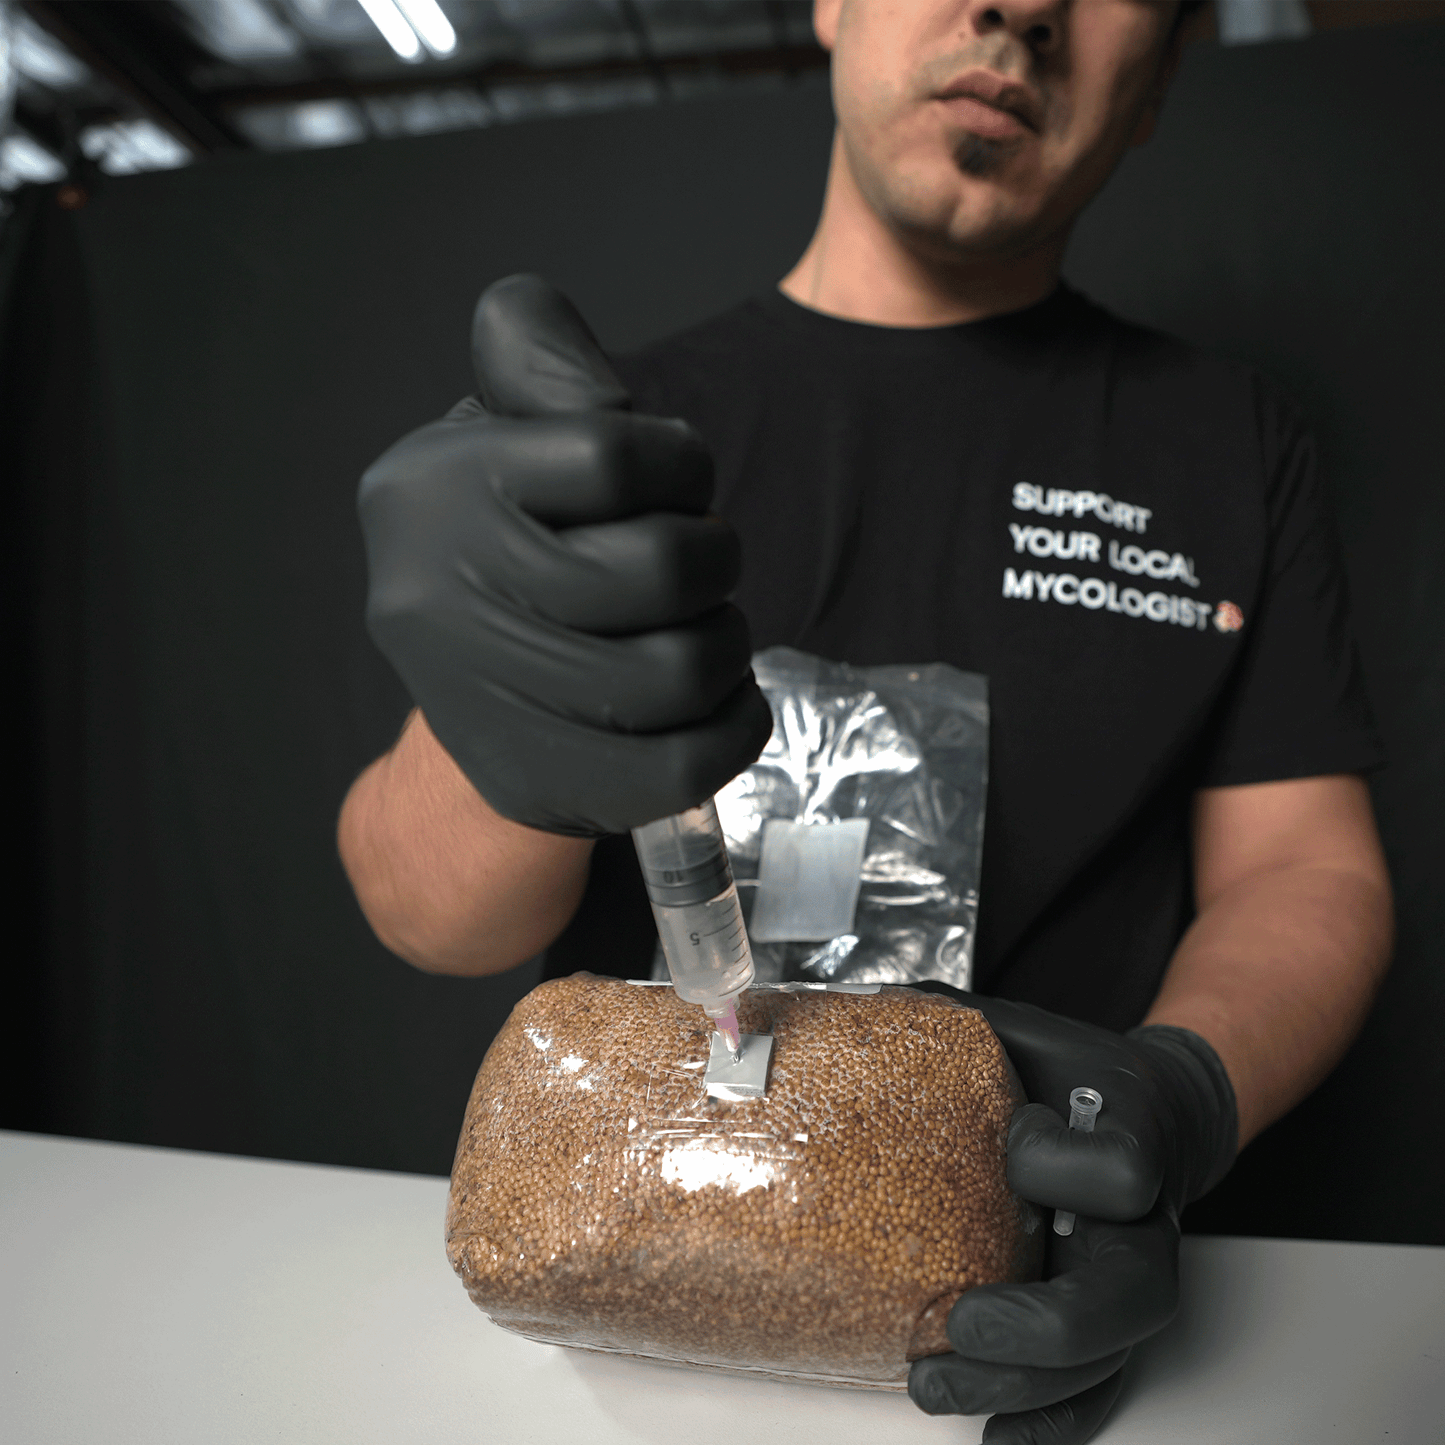 A person in a black t-shirt giving a thumbs up while holding a syringe over the self-healing injection port of the grain spawn bag, ready for inoculation.